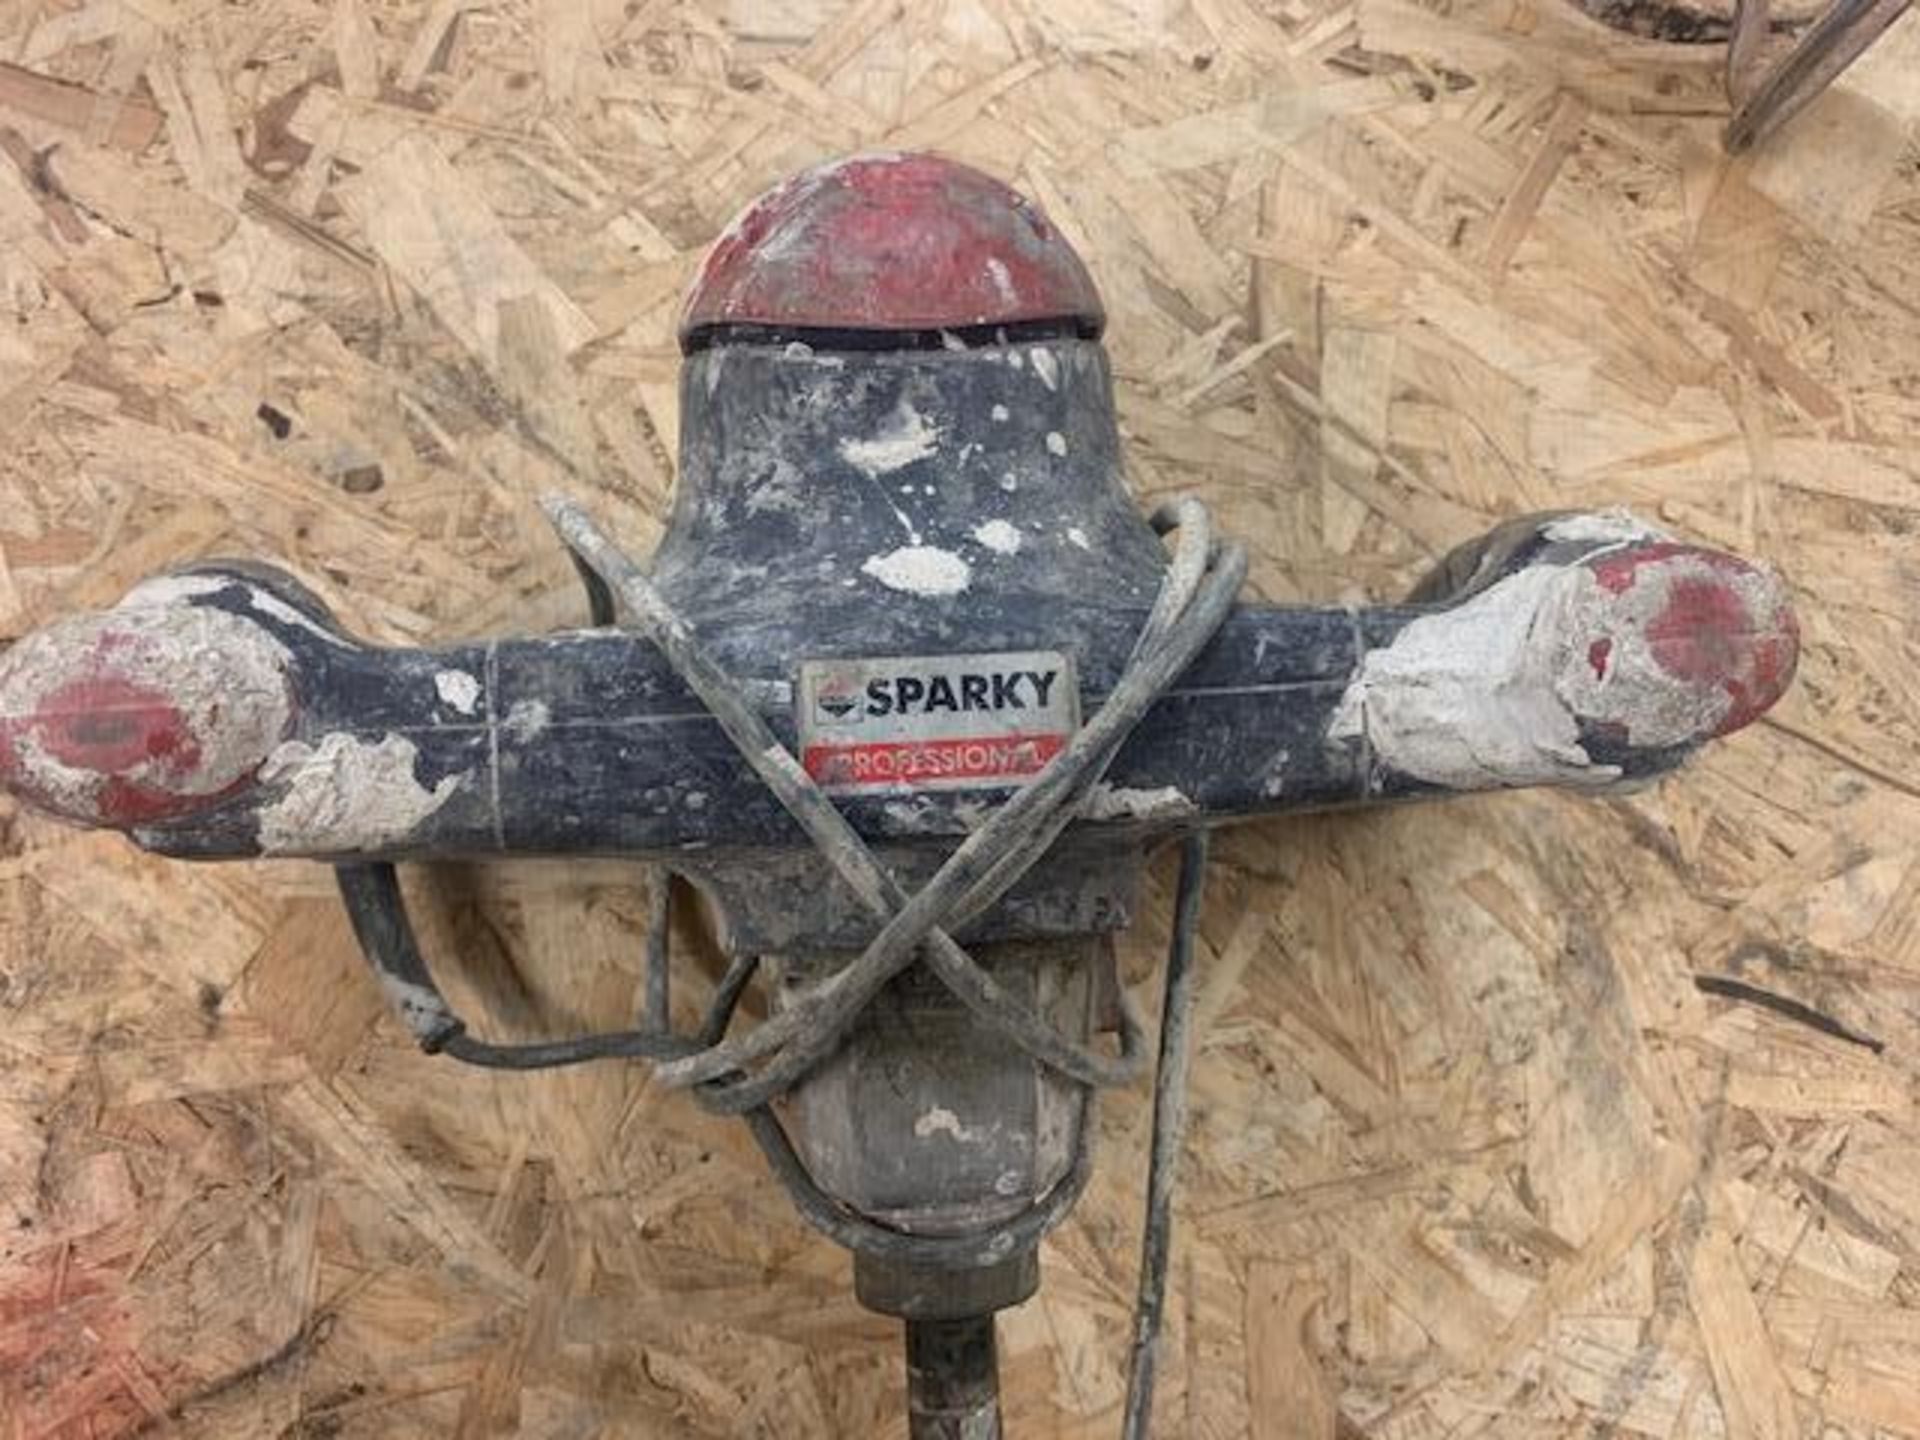 Sparky professional paddle mixer 110v